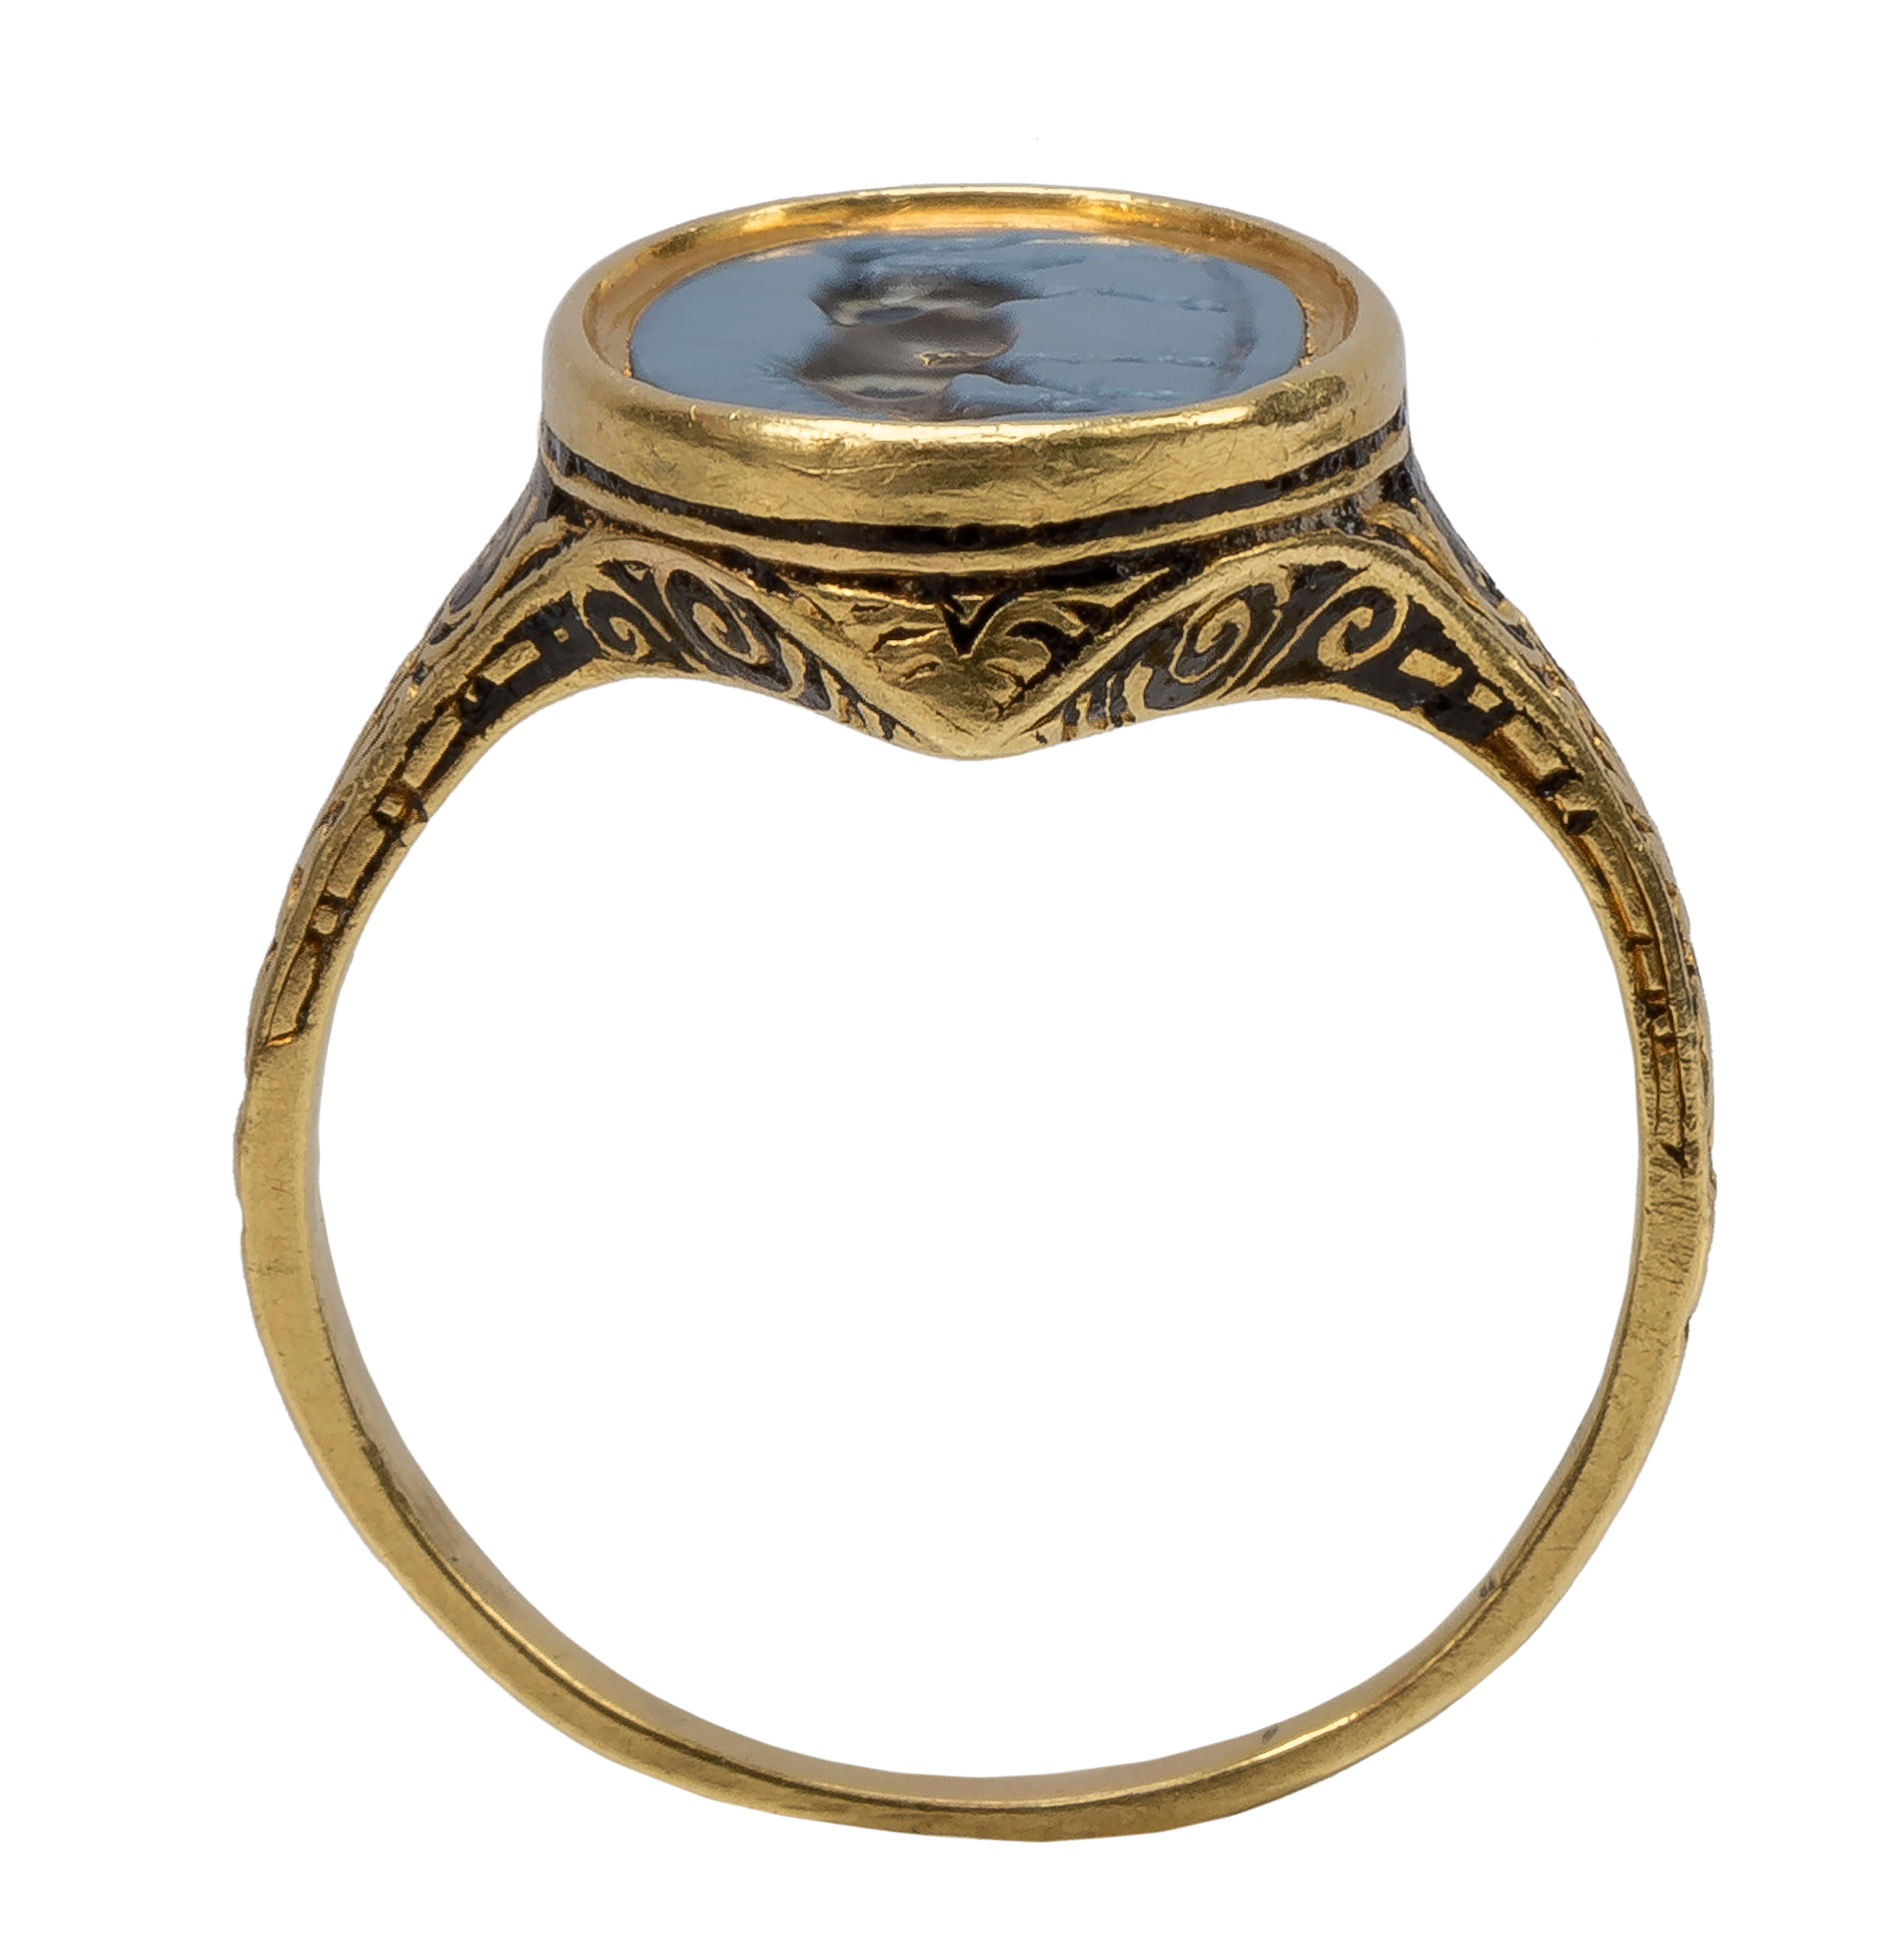 Renaissance ring with Roman horse intaglio  
Ring: Western Europe, c. 1580-90, Roman intaglio: 1st century AD  
Gold, champlevé enamel, nicolo agate 
Weight 5.2 gr.; Circumference 57.15 mm.; US size 8; UK size Q

In the Renaissance period, ancient